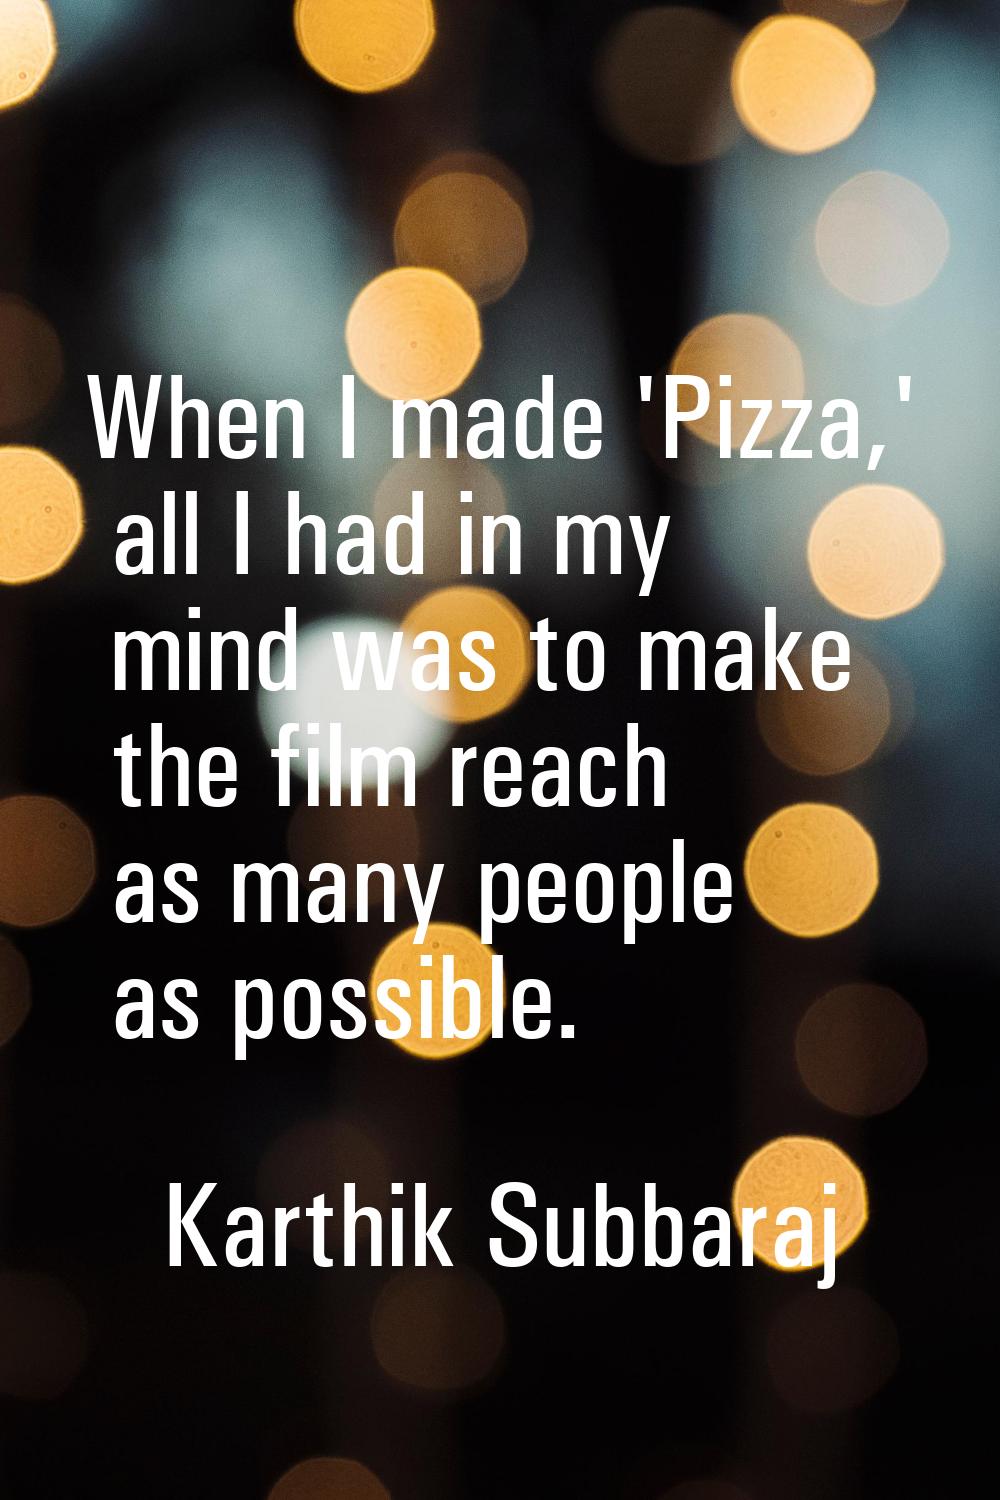 When I made 'Pizza,' all I had in my mind was to make the film reach as many people as possible.